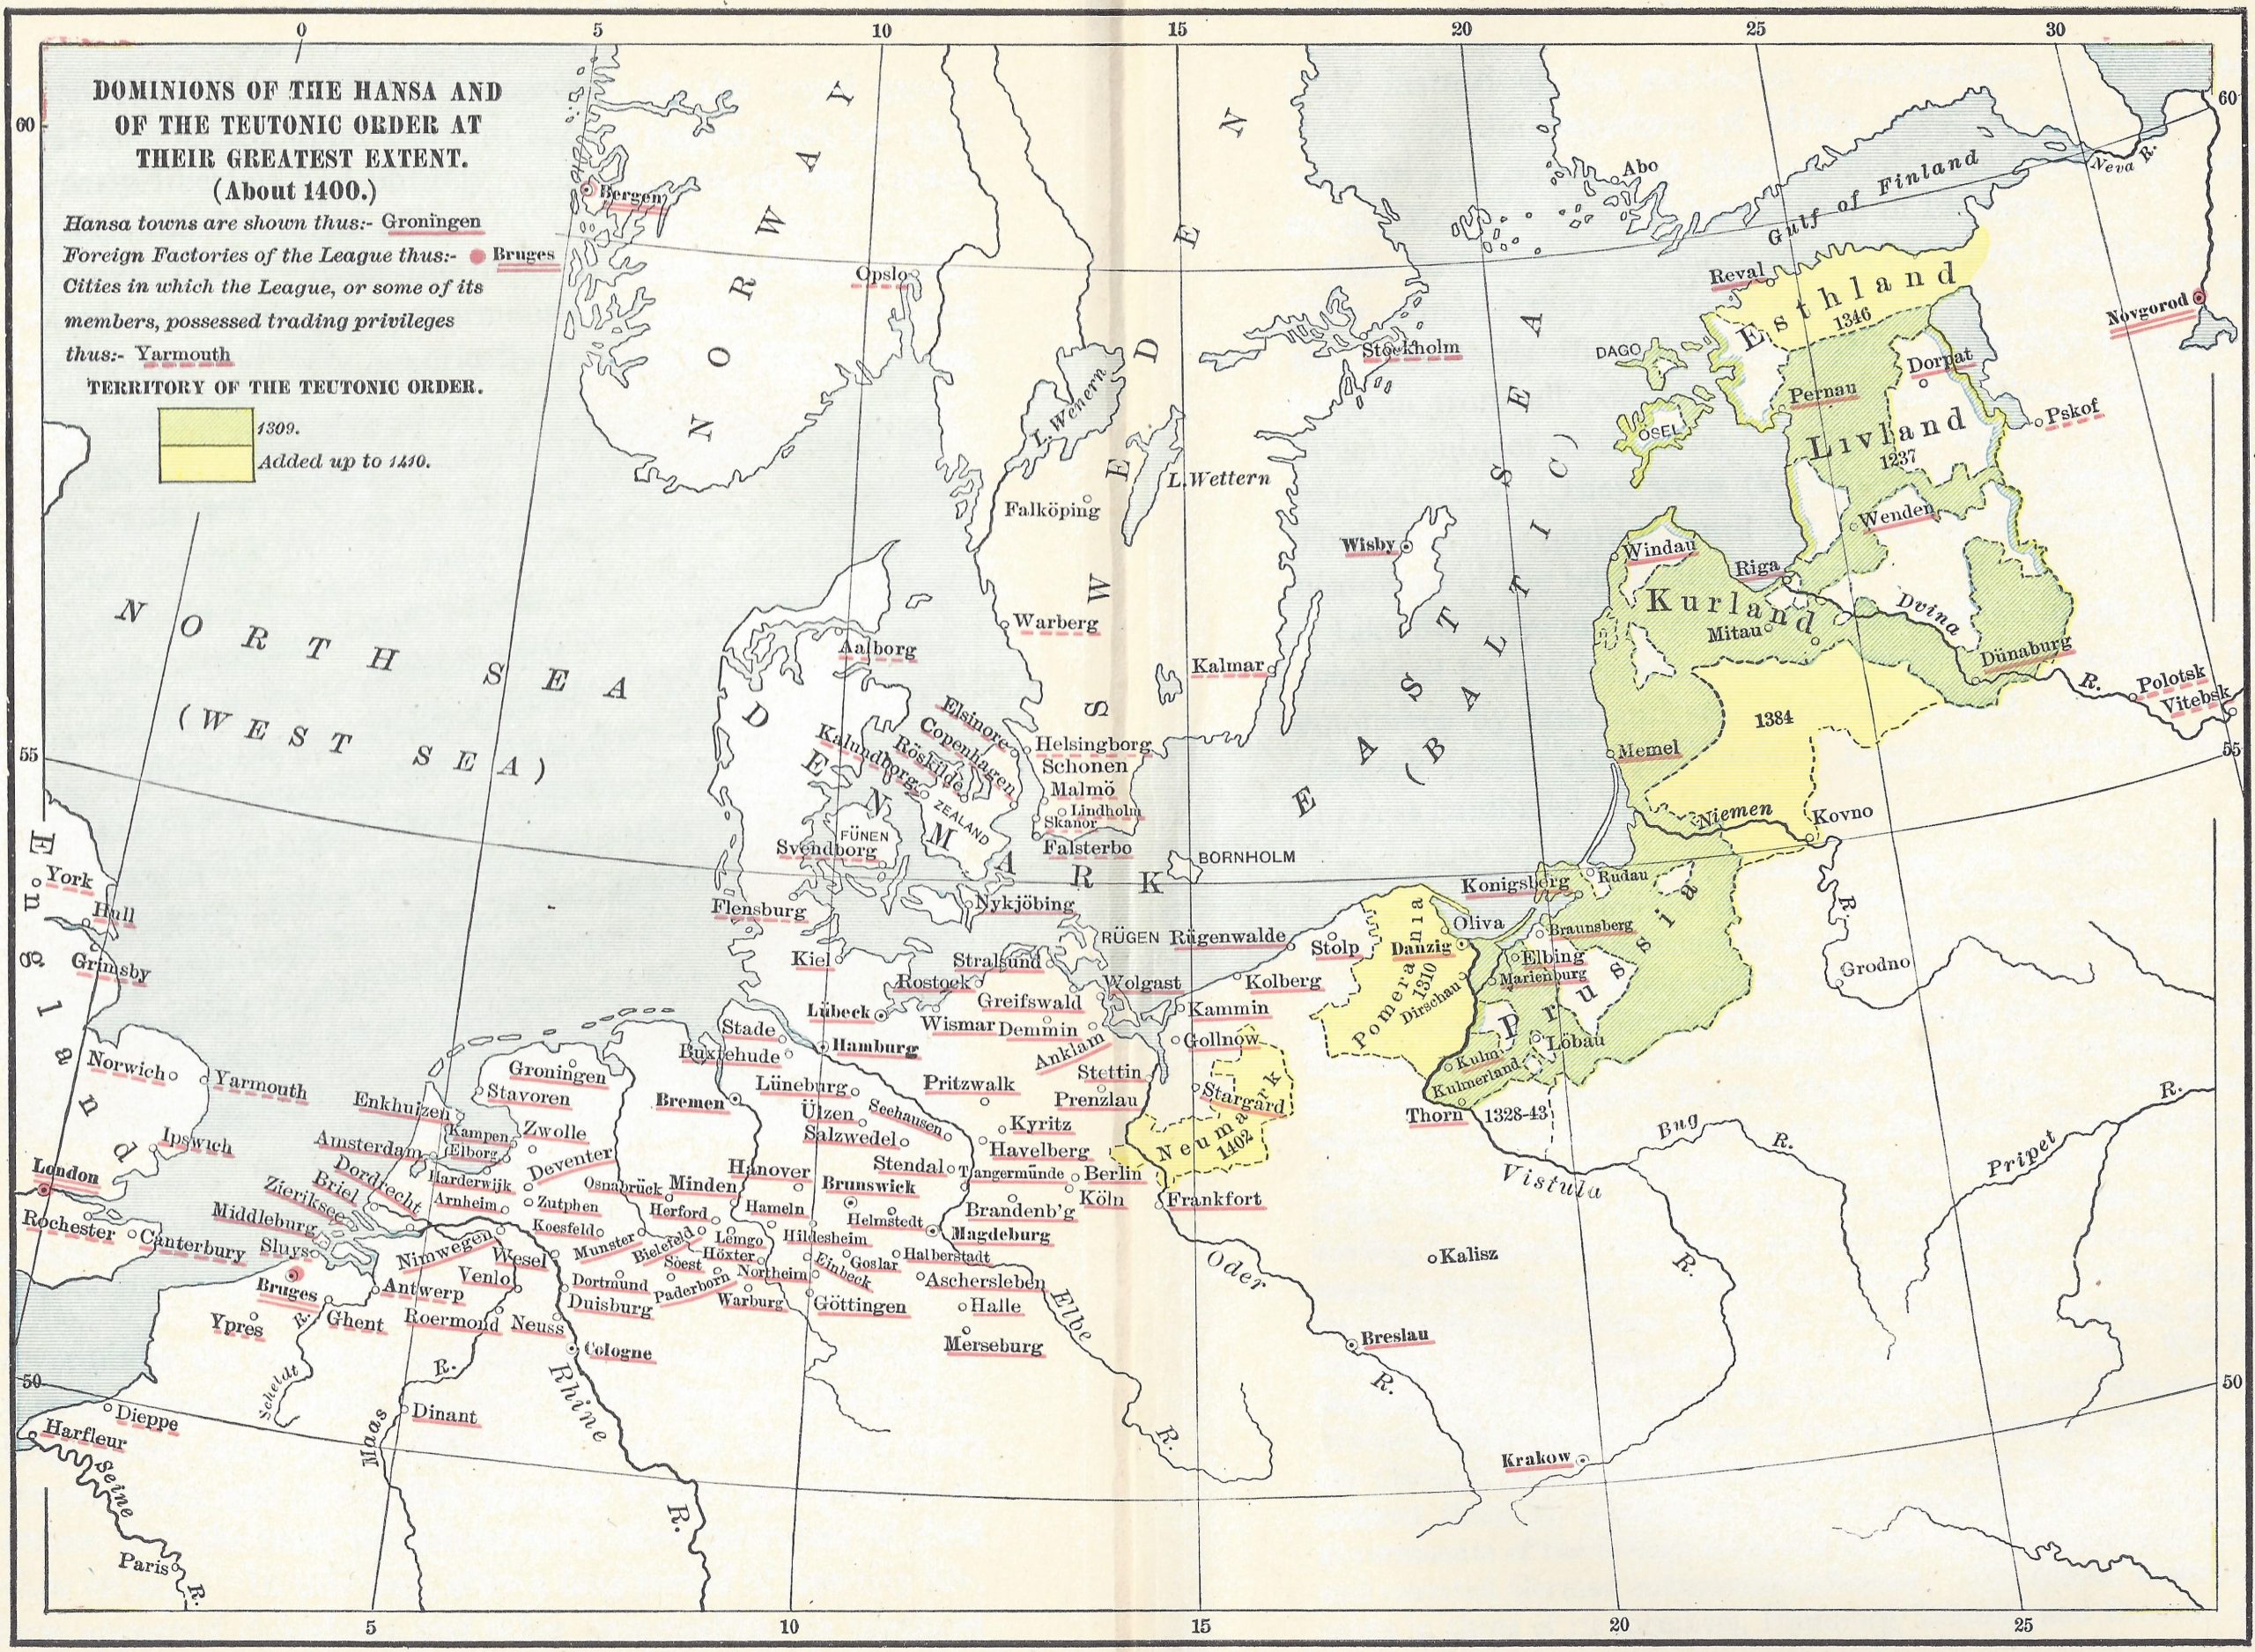 Dominions of the Hansa and of the Teutonic Order at their Greatest Extent (about 1400).